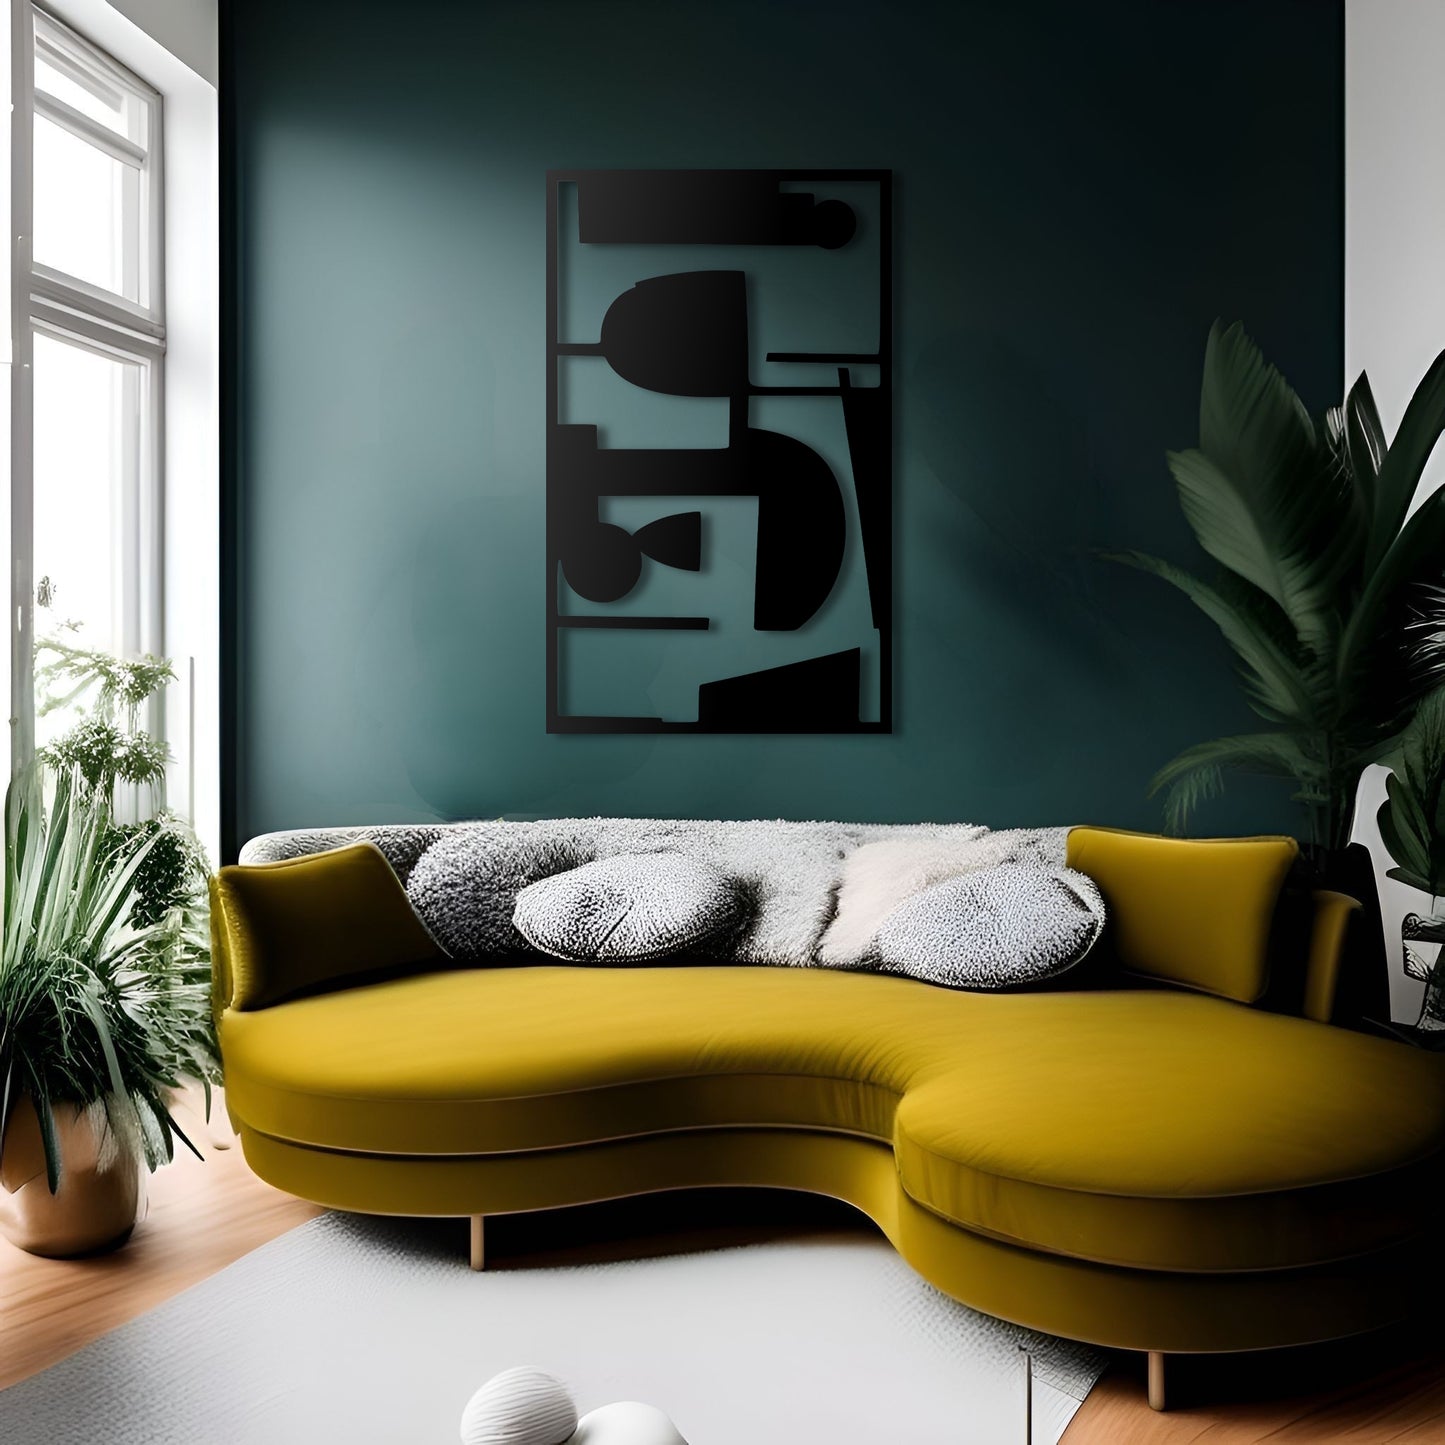 Abstract Hyper-Shapes Metal Wall Art with Suprematism Influence